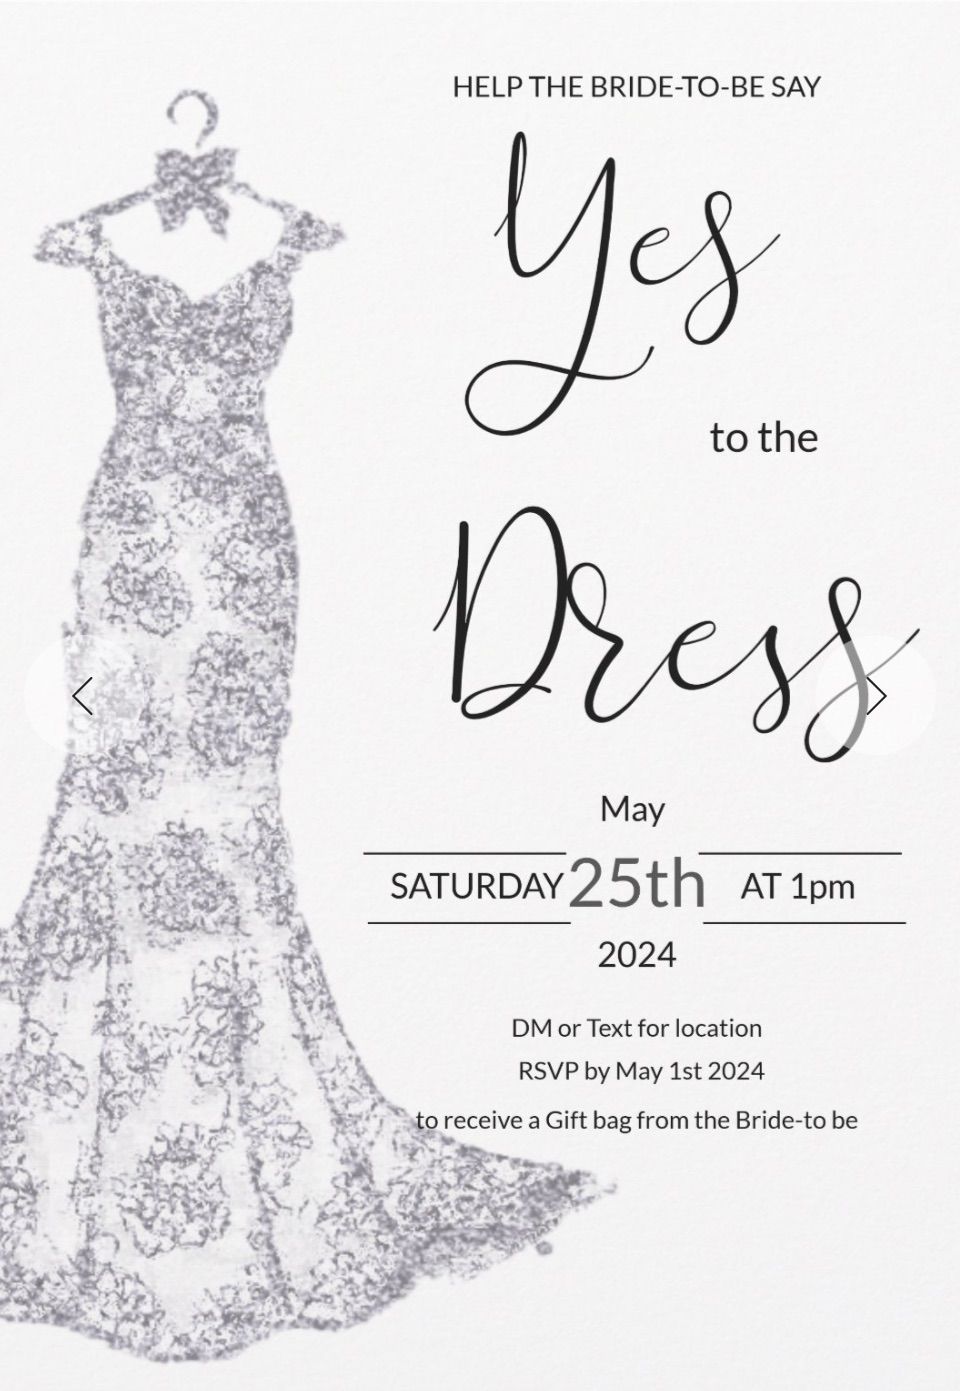 Say yes to the dress!!